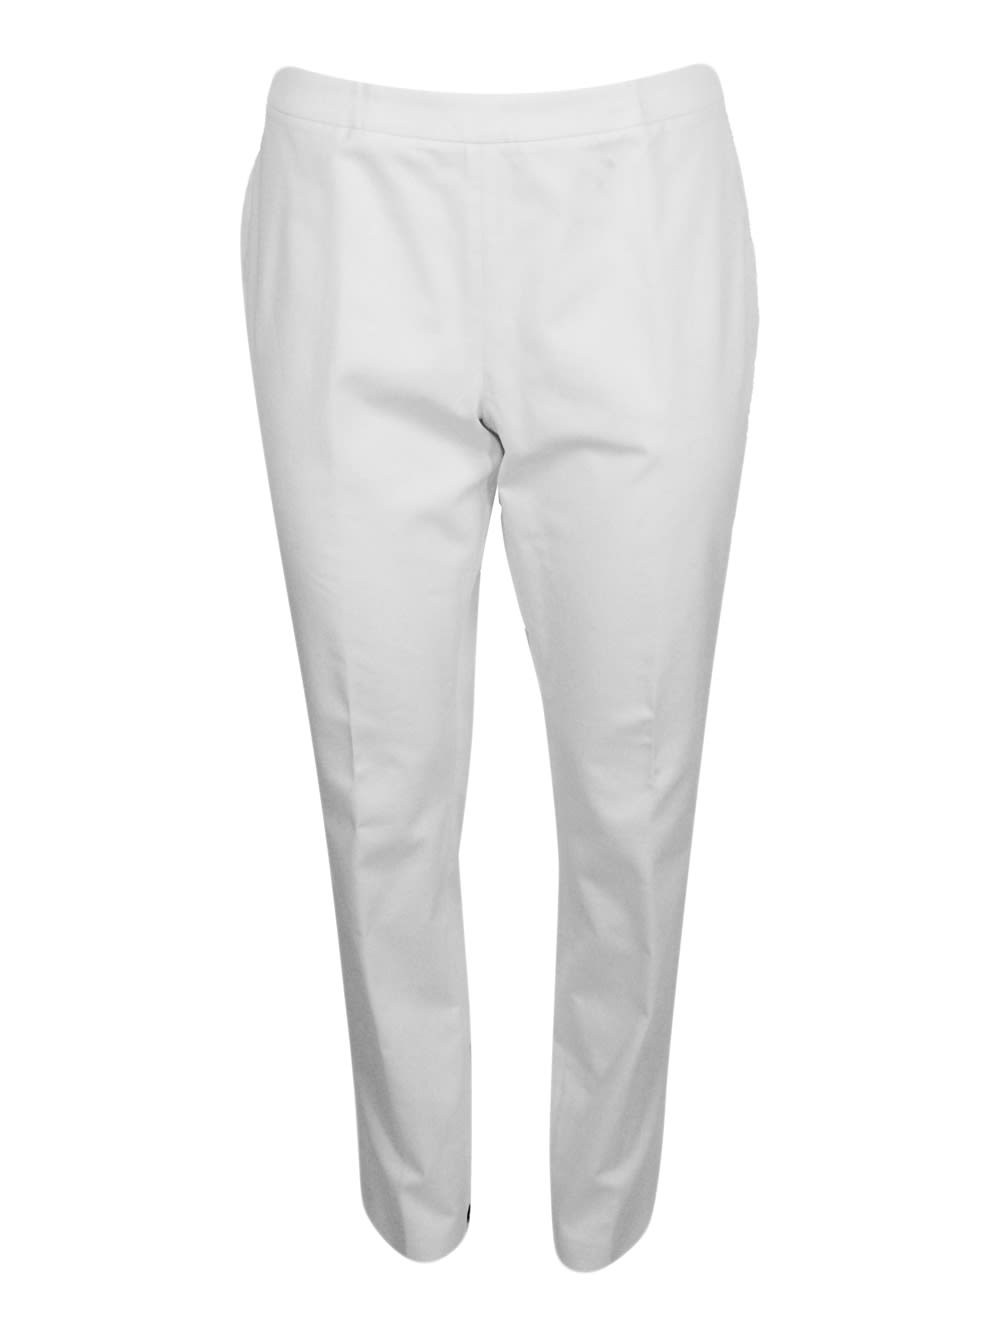 Shop Fabiana Filippi Stretch Cotton Poplin Trousers Are Characterized By A Slim Fit And A Zip Closure On The Side In White